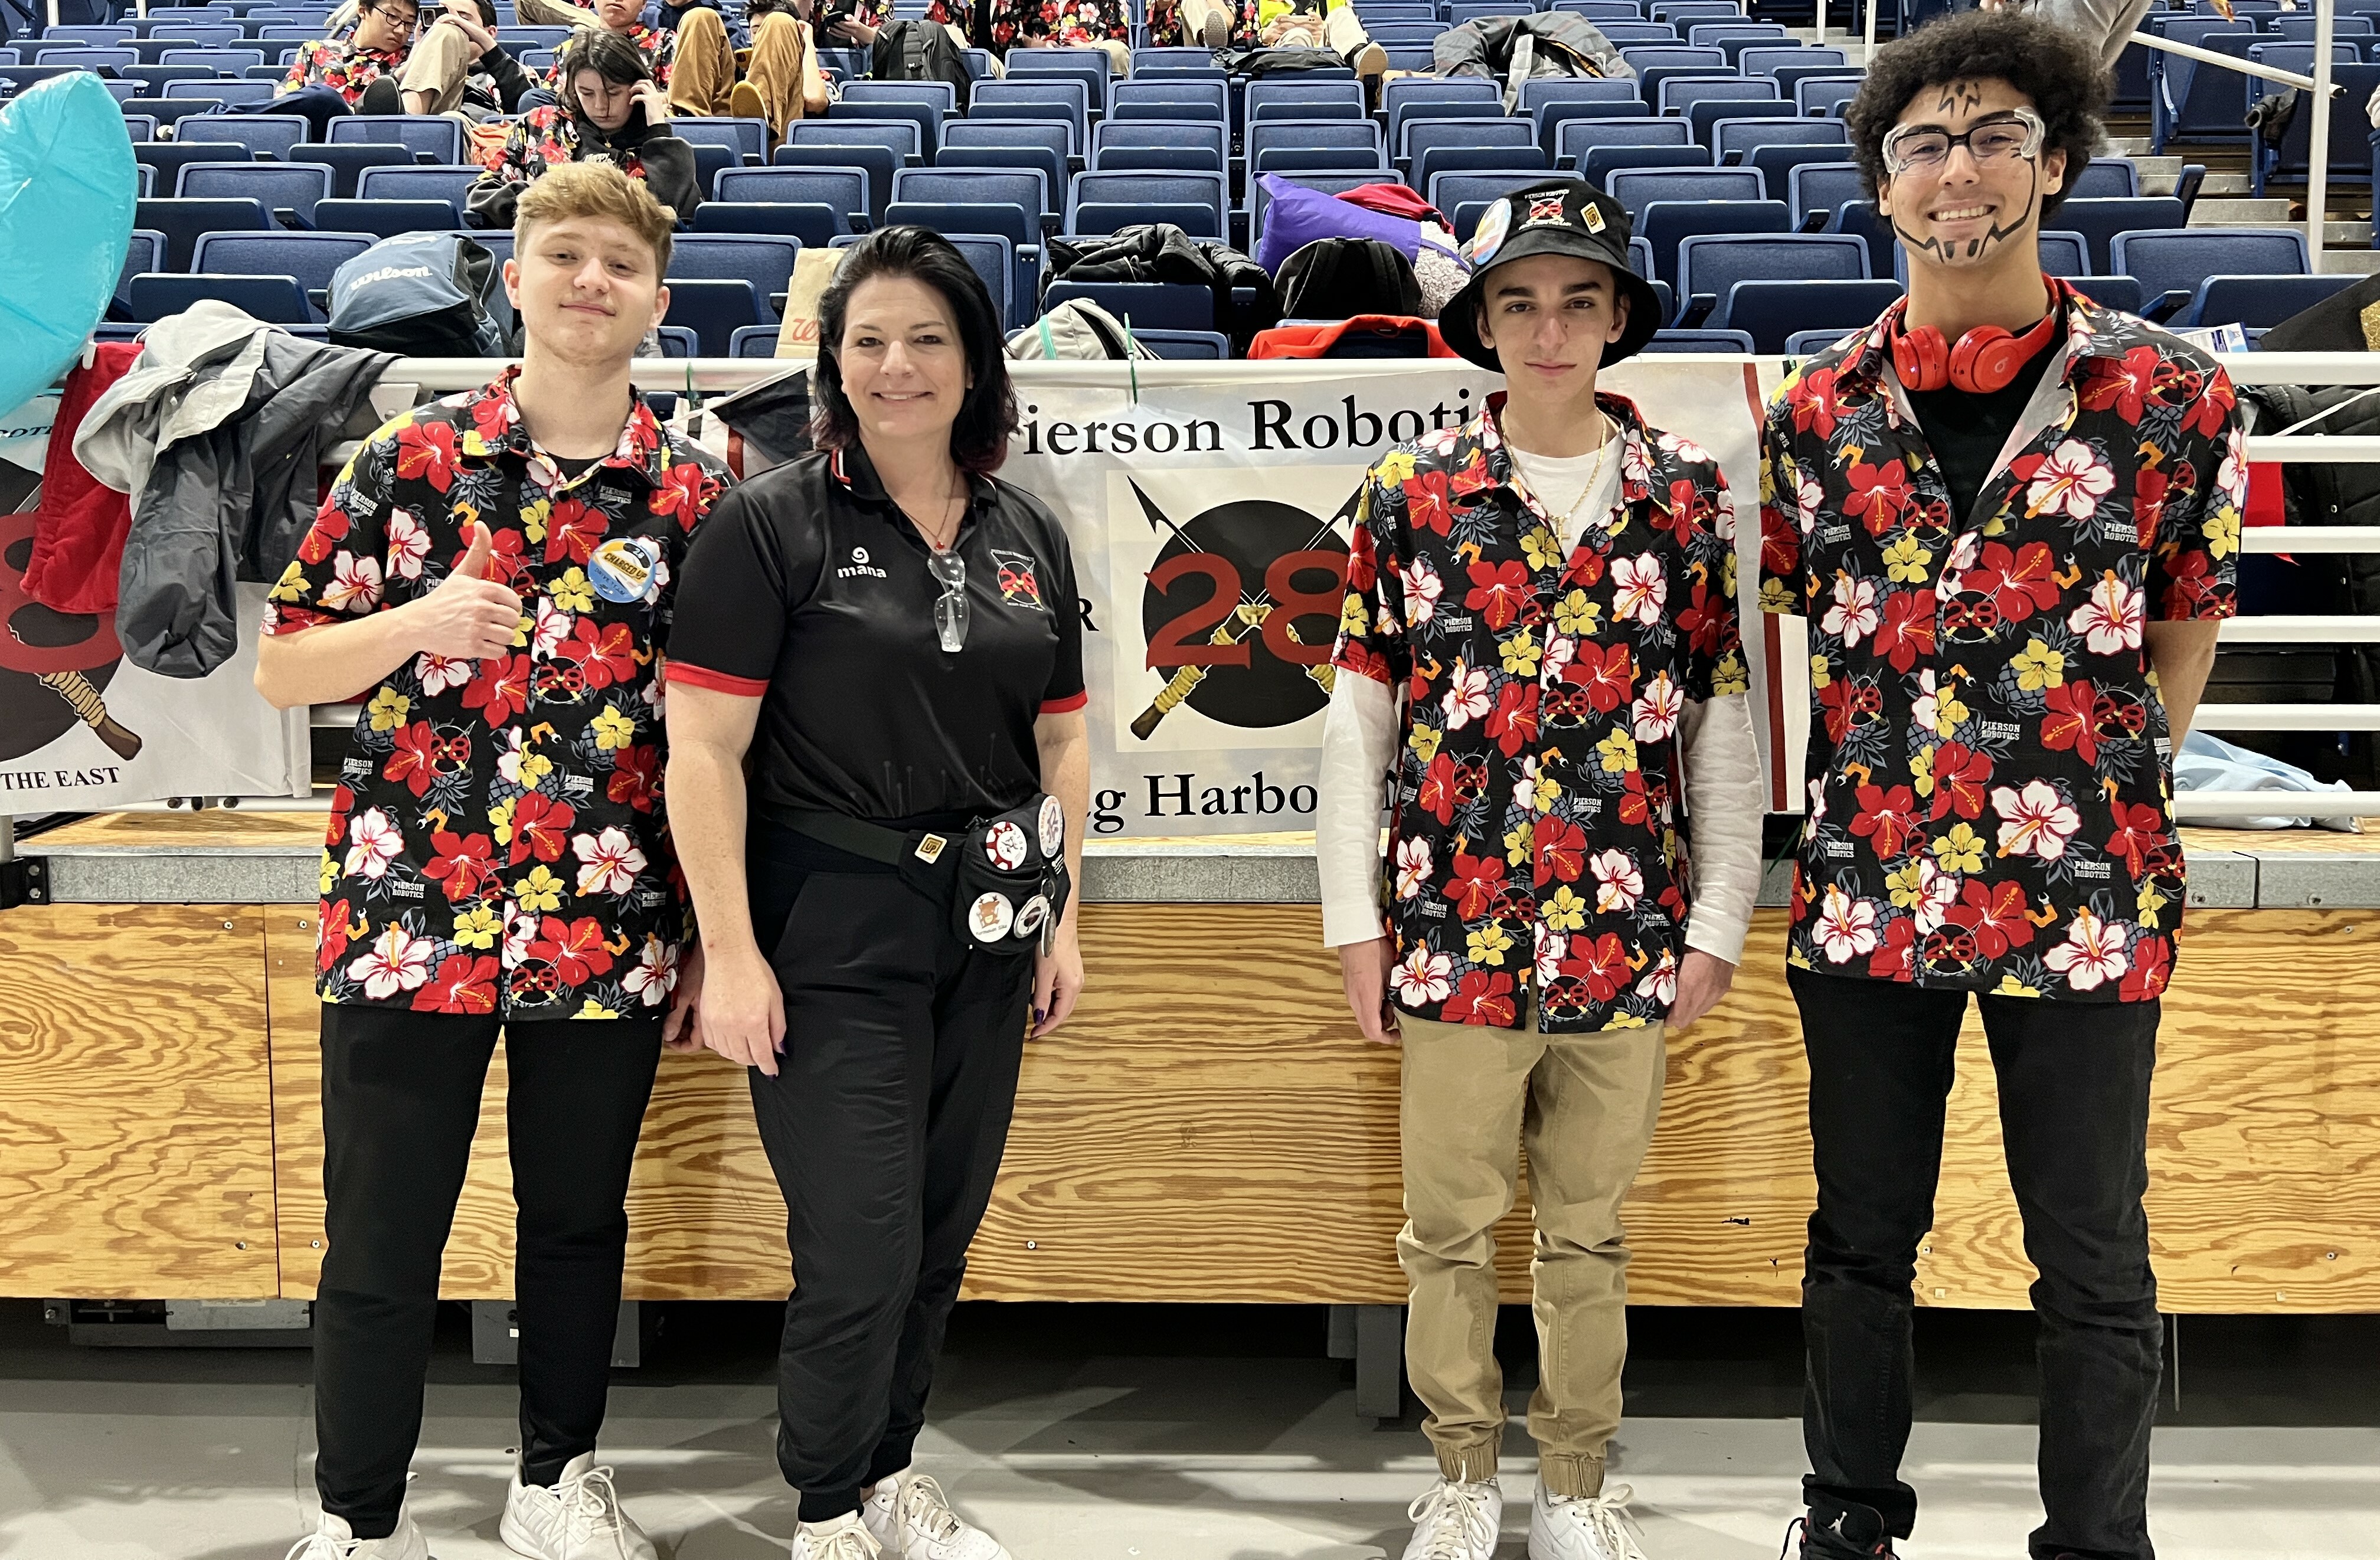 The combined Pierson Southampton robotics team earned the prestigious Impact Award at a First Robotics regional competition at Hofstra University. Winning the award automatically qualified the team for a spot at the First Robotics Worlds in Texas next month.